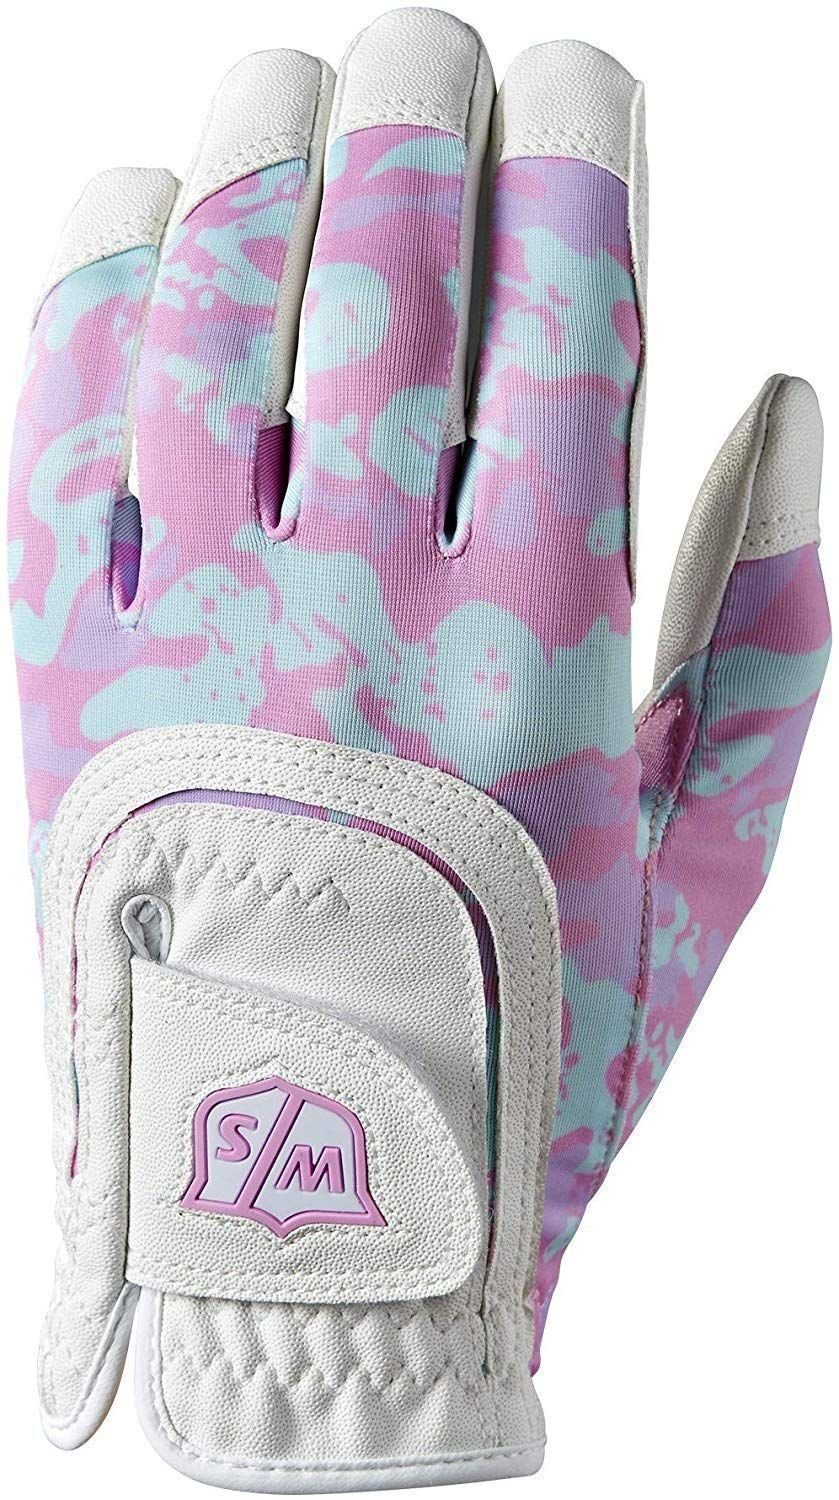 Handschuhe Wilson Staff Fit-All Junior Golf Glove White/Pink Camo Left Hand for Right Handed Golfers